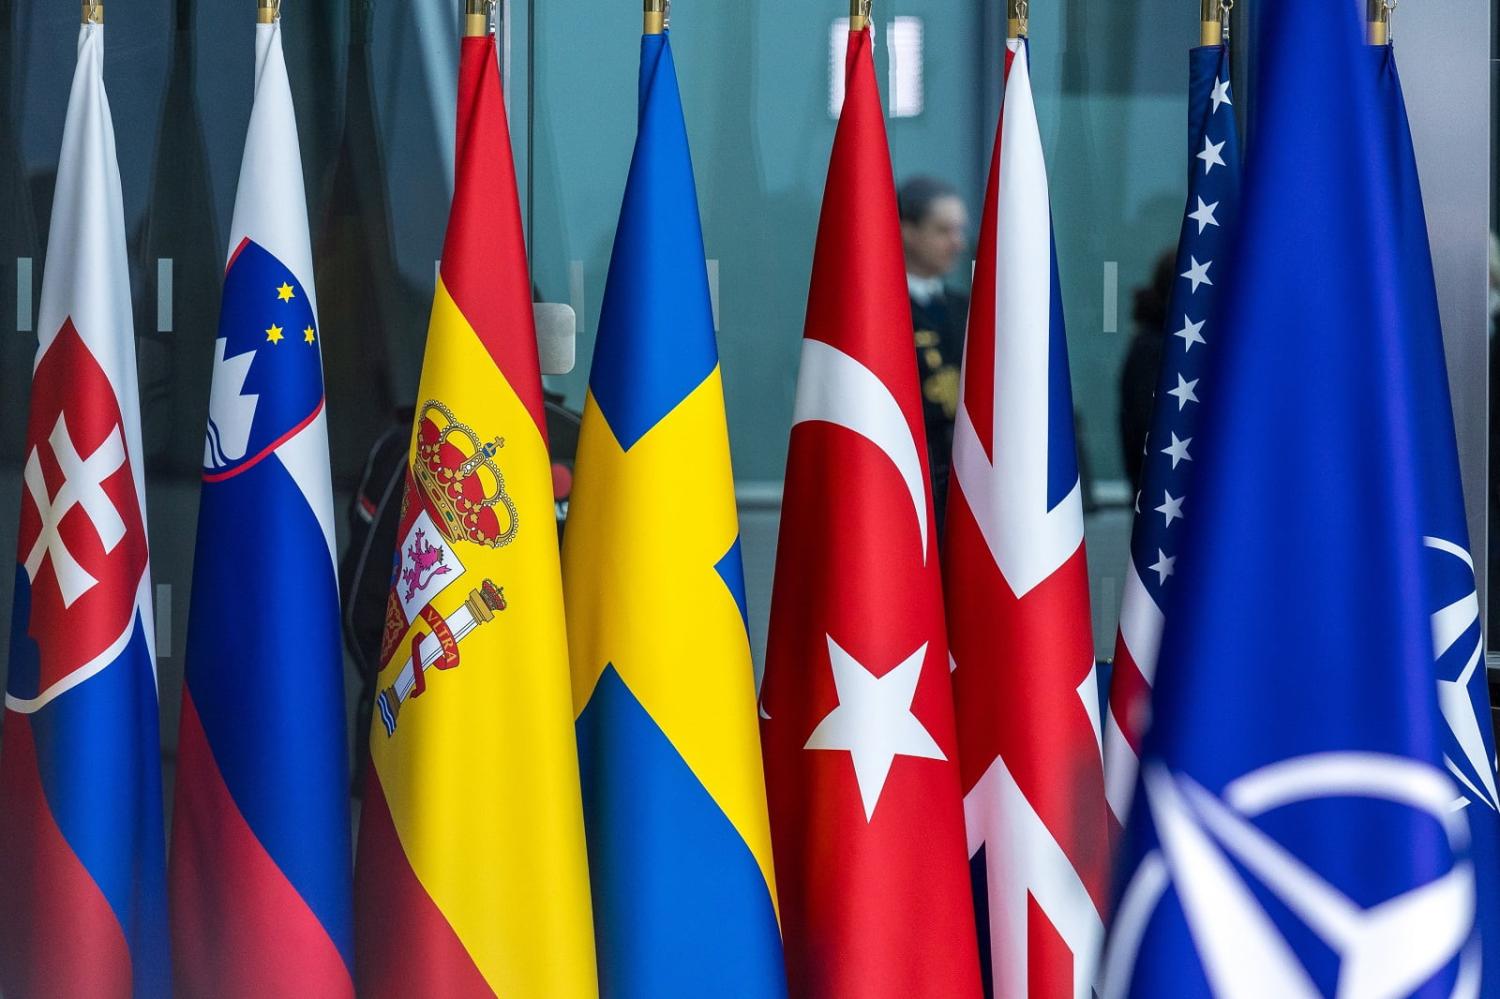 The flag of Sweden joins those of other NATO countries, marking Sweden's accession to NATO on 11 March 2024 in Brussels, Belgium (Omar Havana/Getty Images)